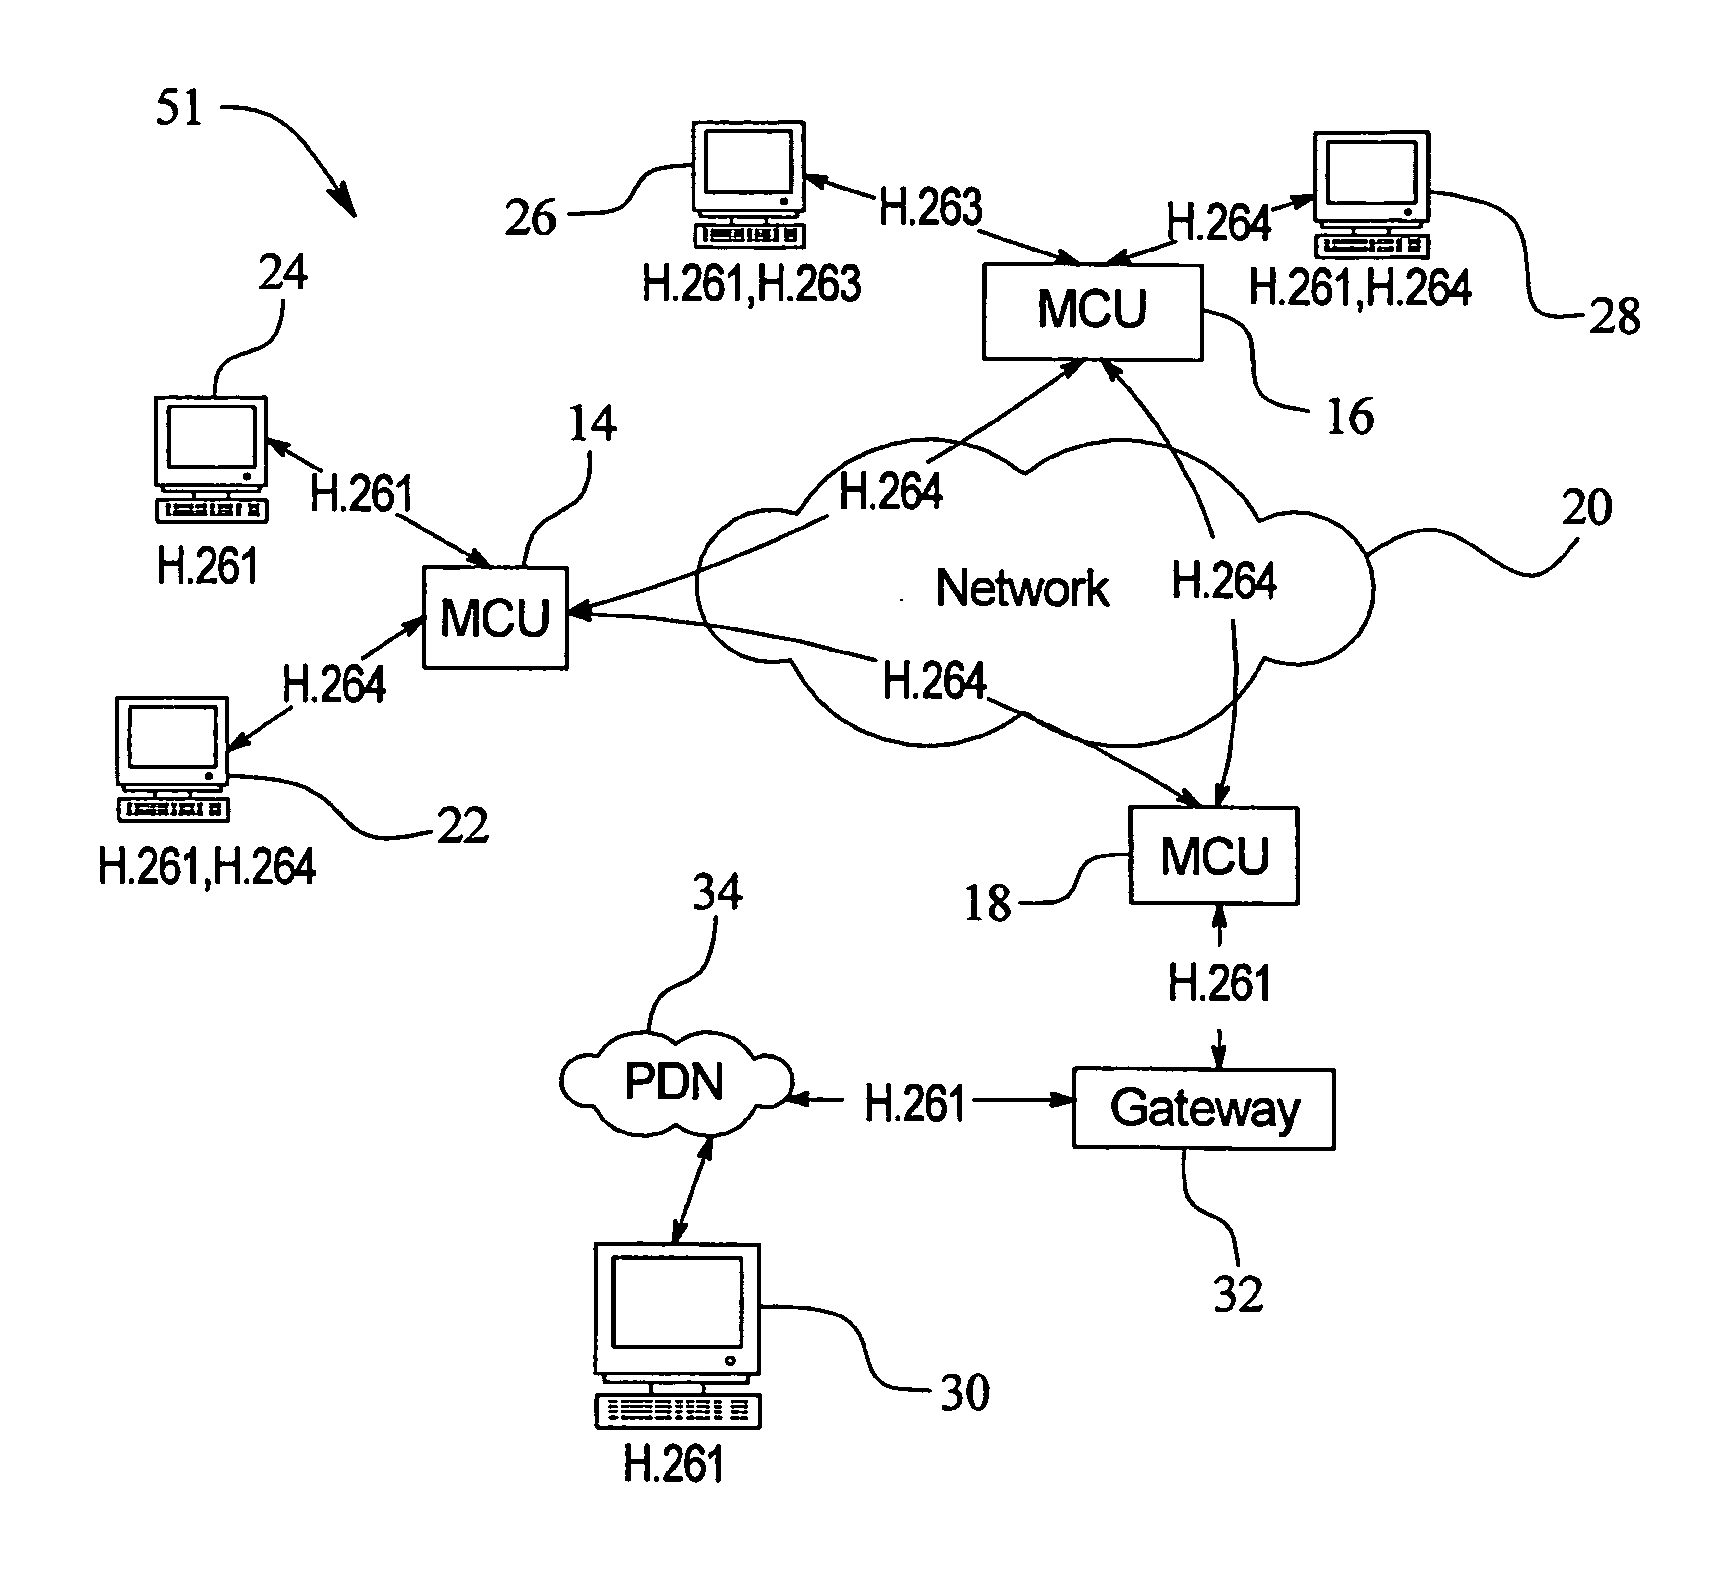 System and method for high quality video conferencing with heterogeneous end-points and networks